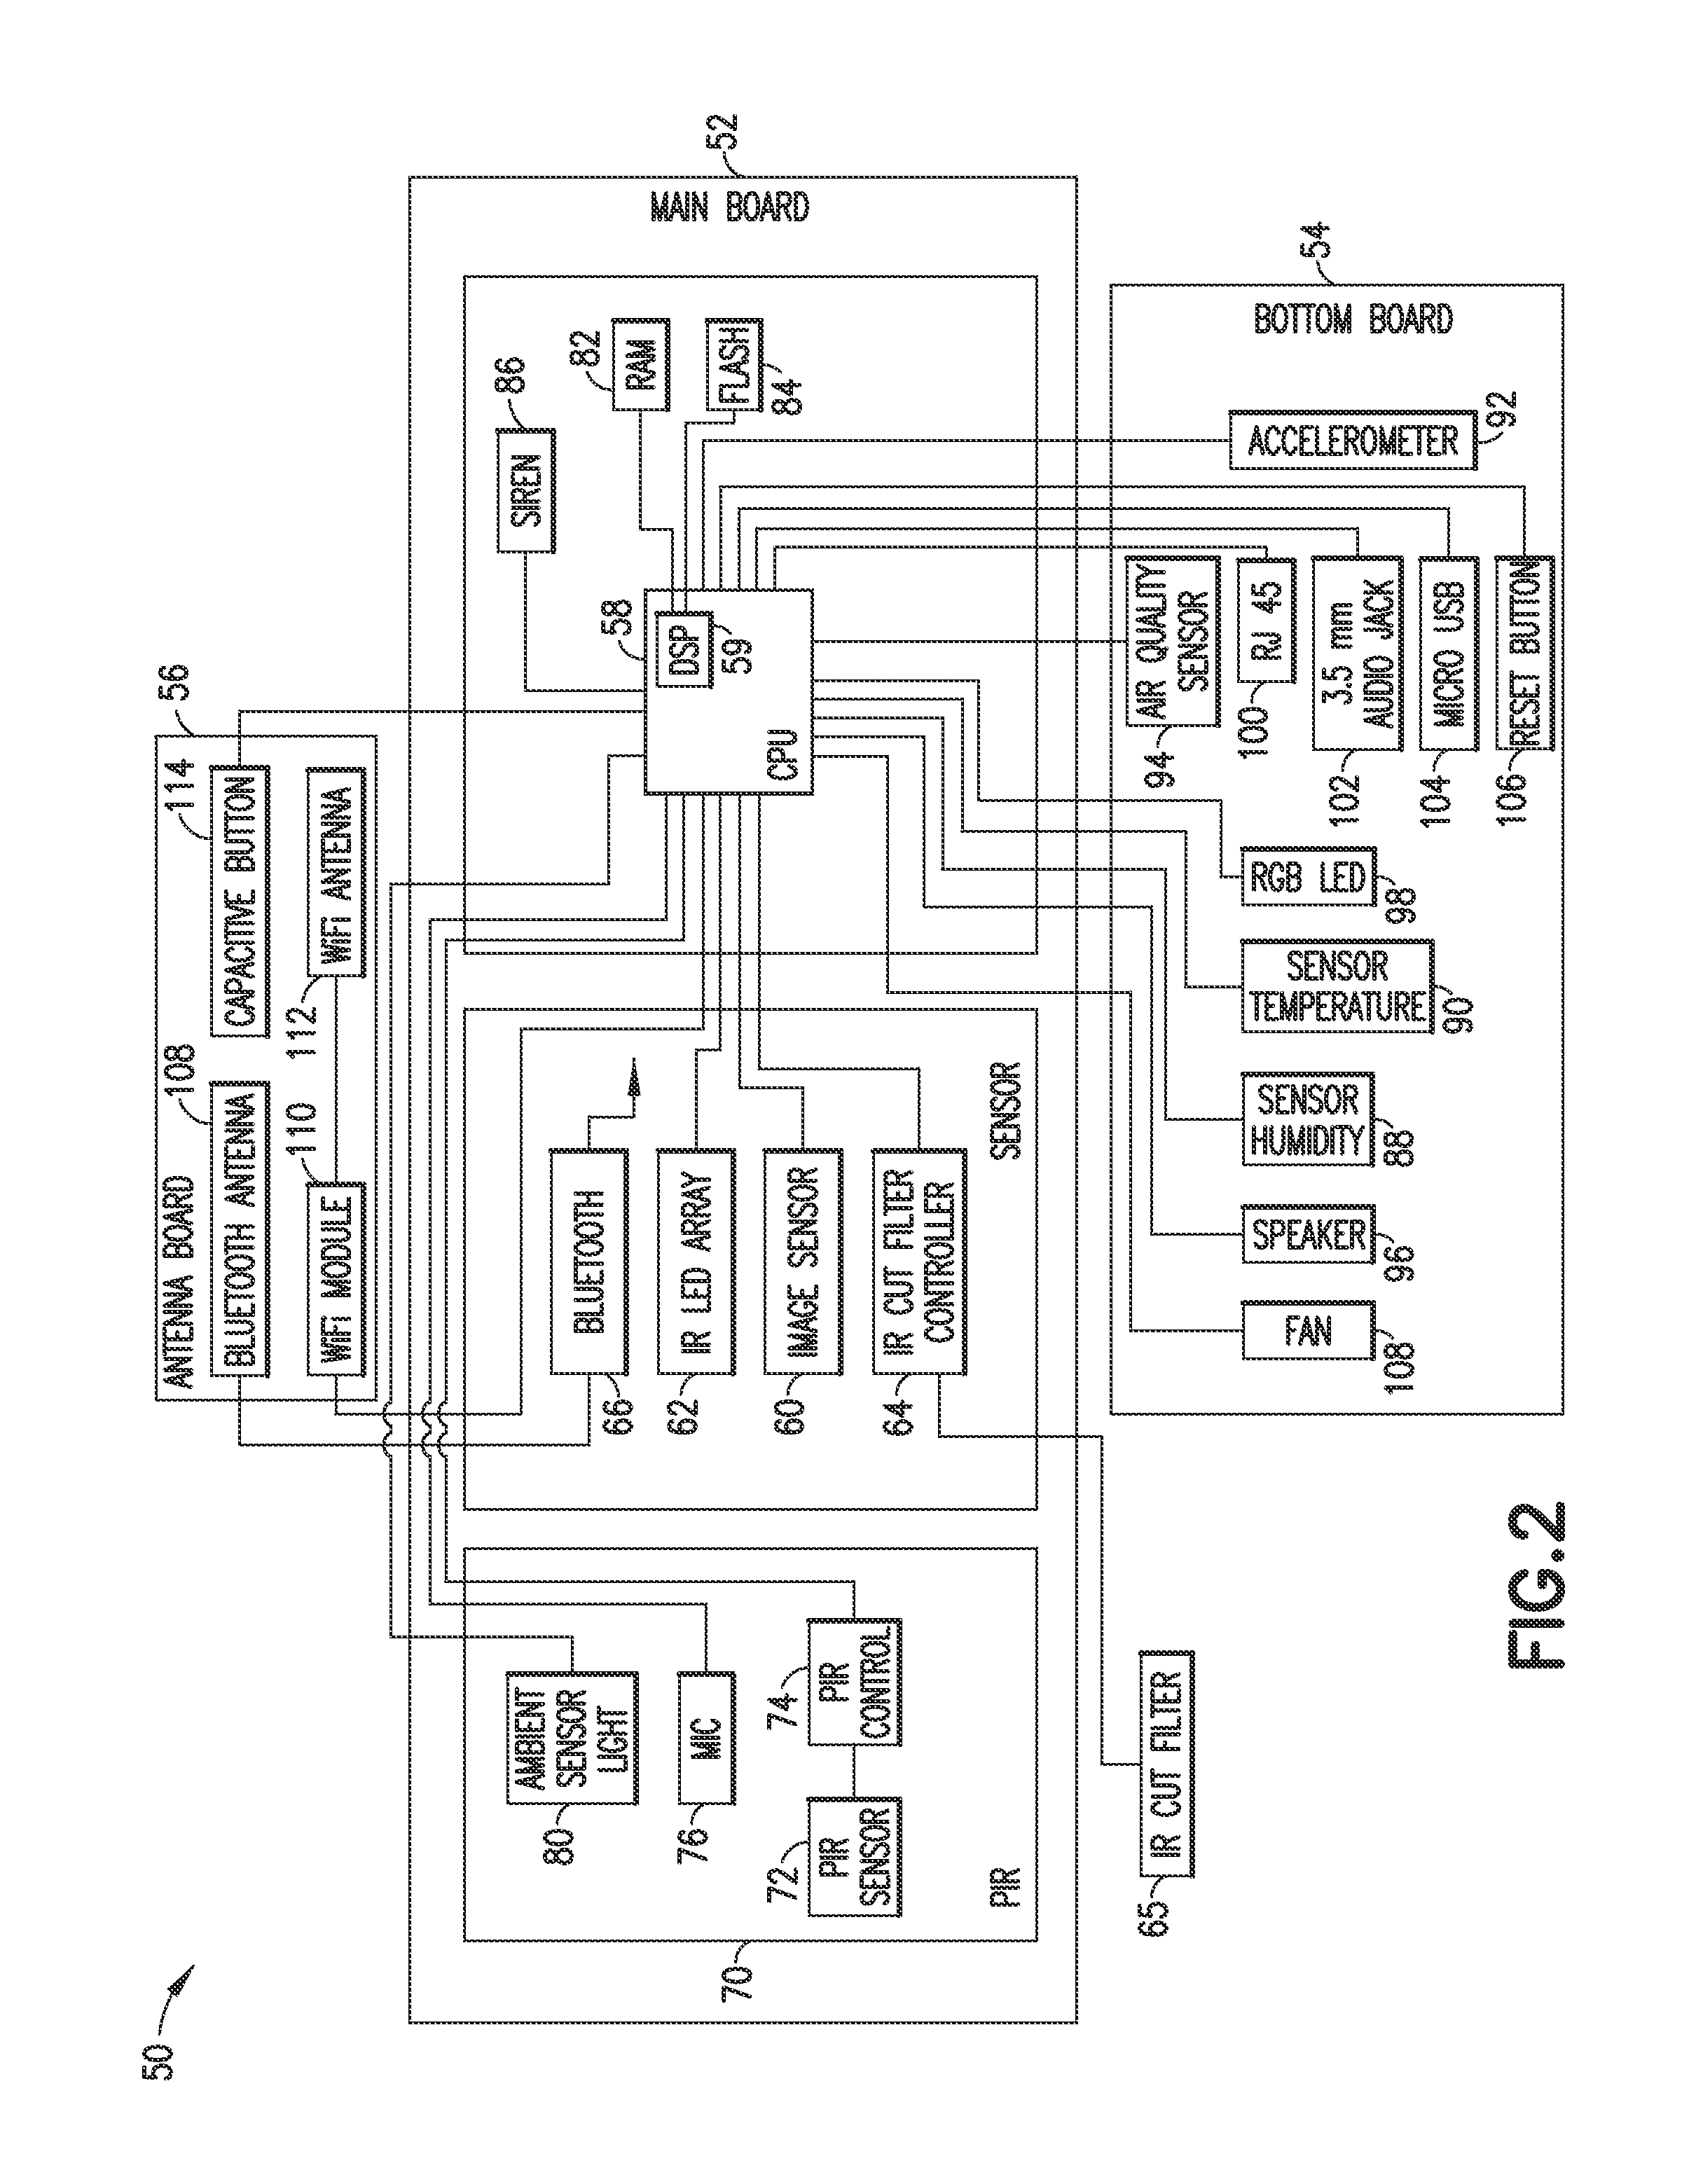 Method for arming and disarming a network enabled device using a user's geo-location